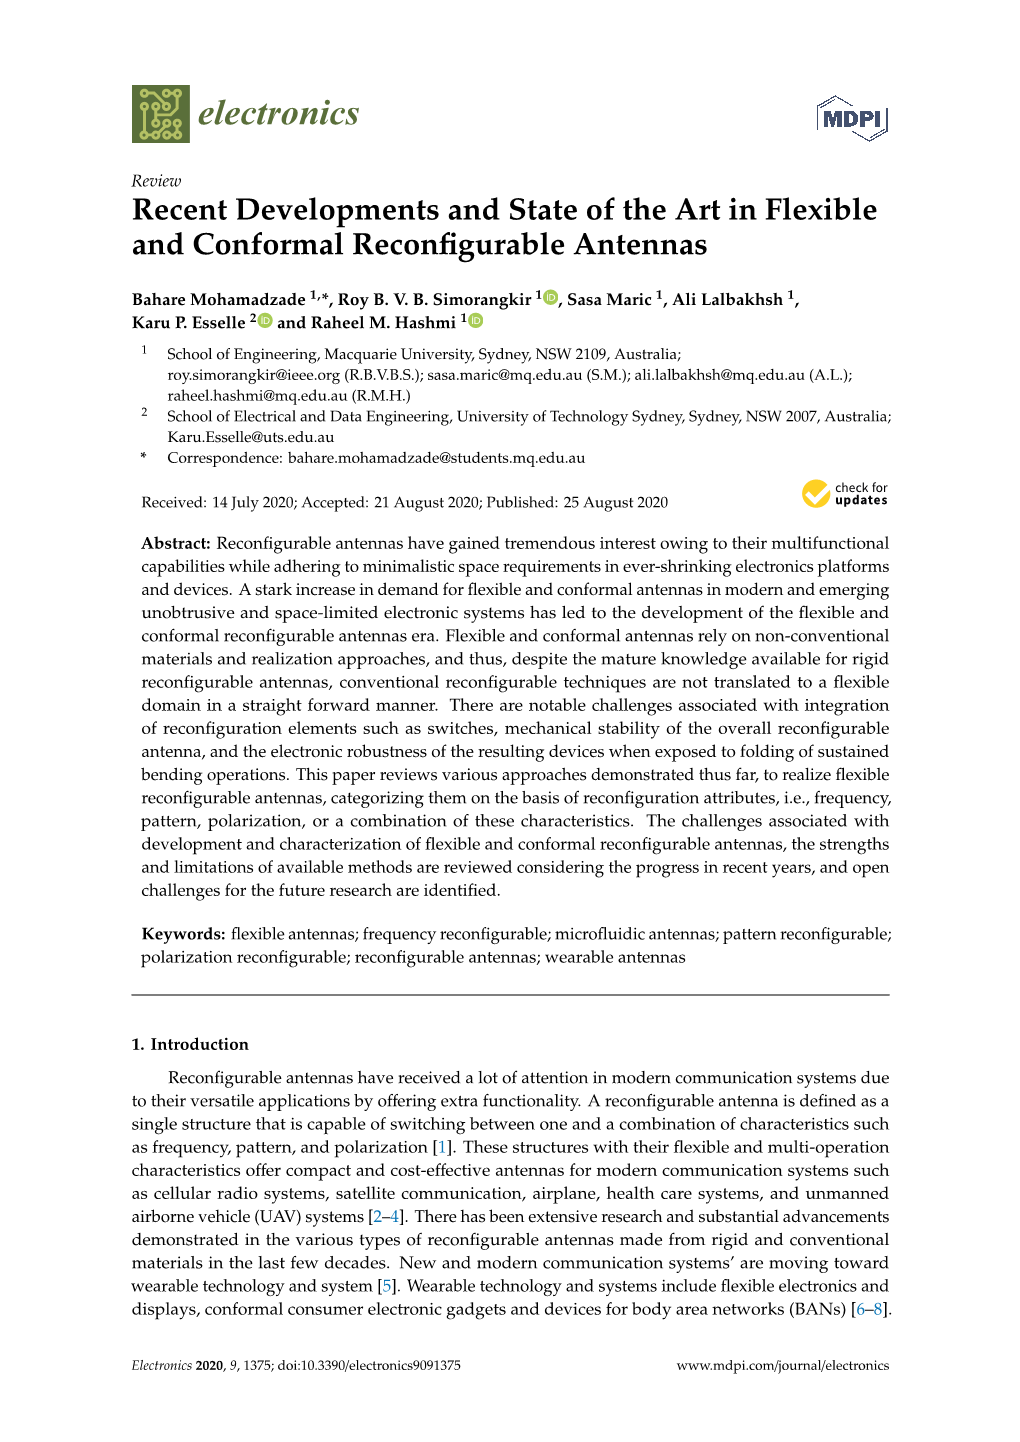 Recent Developments and State of the Art in Flexible and Conformal Reconﬁgurable Antennas